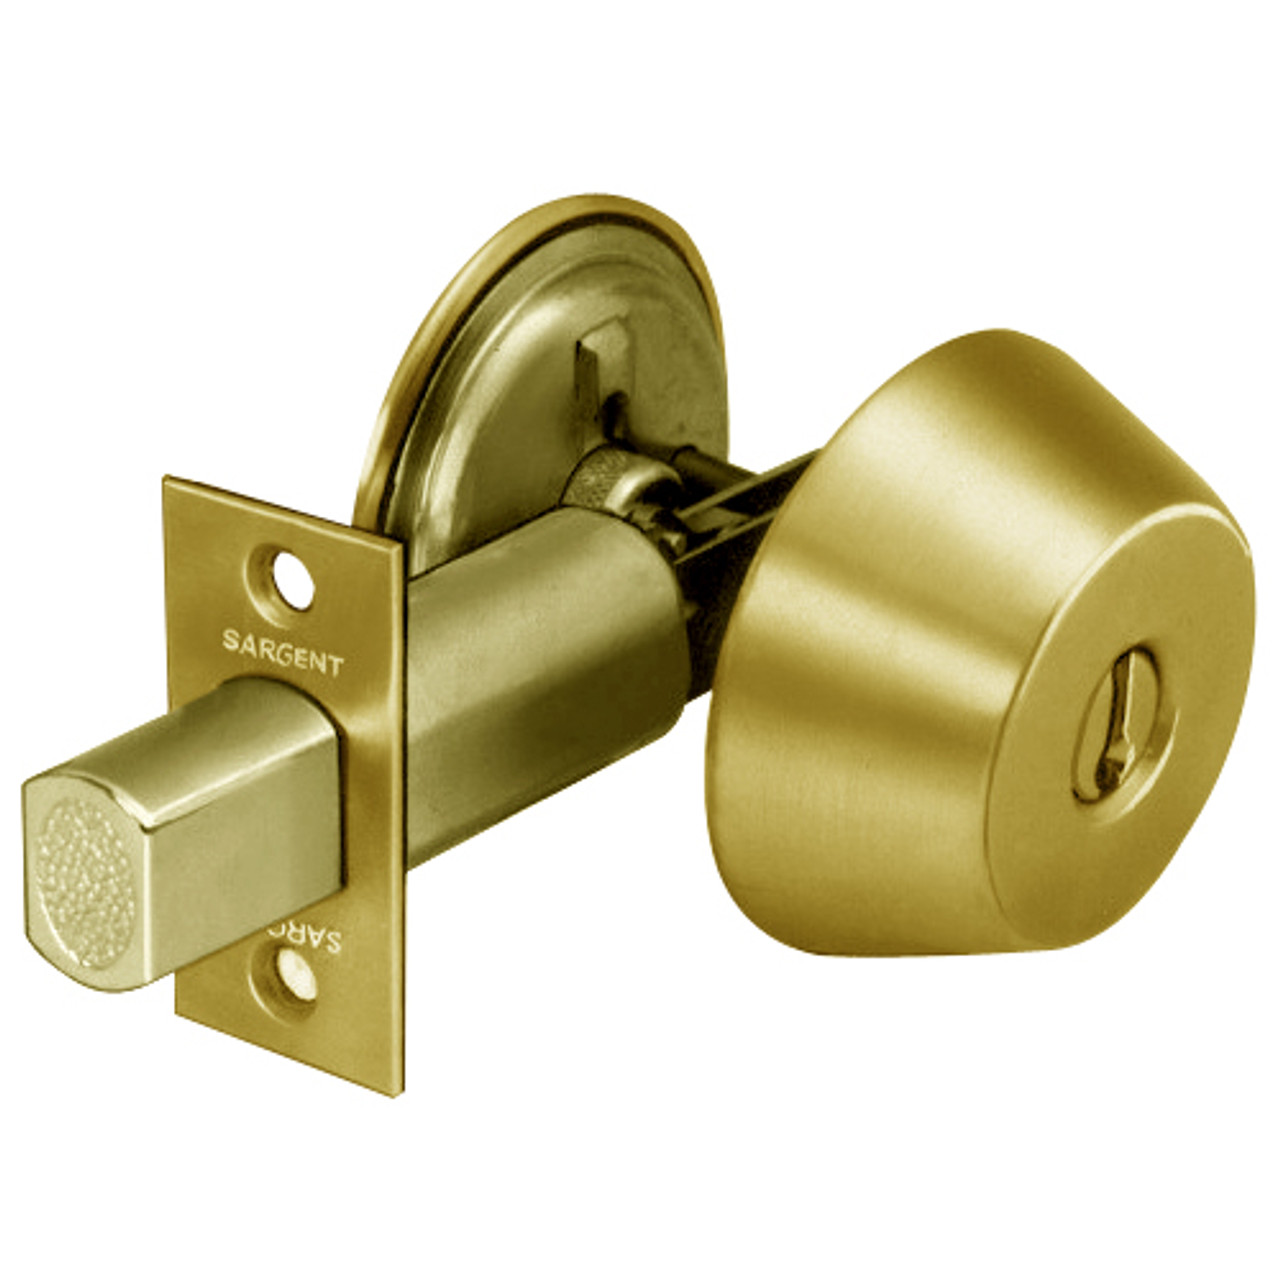 28-486-03 Sargent 480 Series Single Cylinder Auxiliary Deadbolt Lock with Blank Plate in Bright Brass